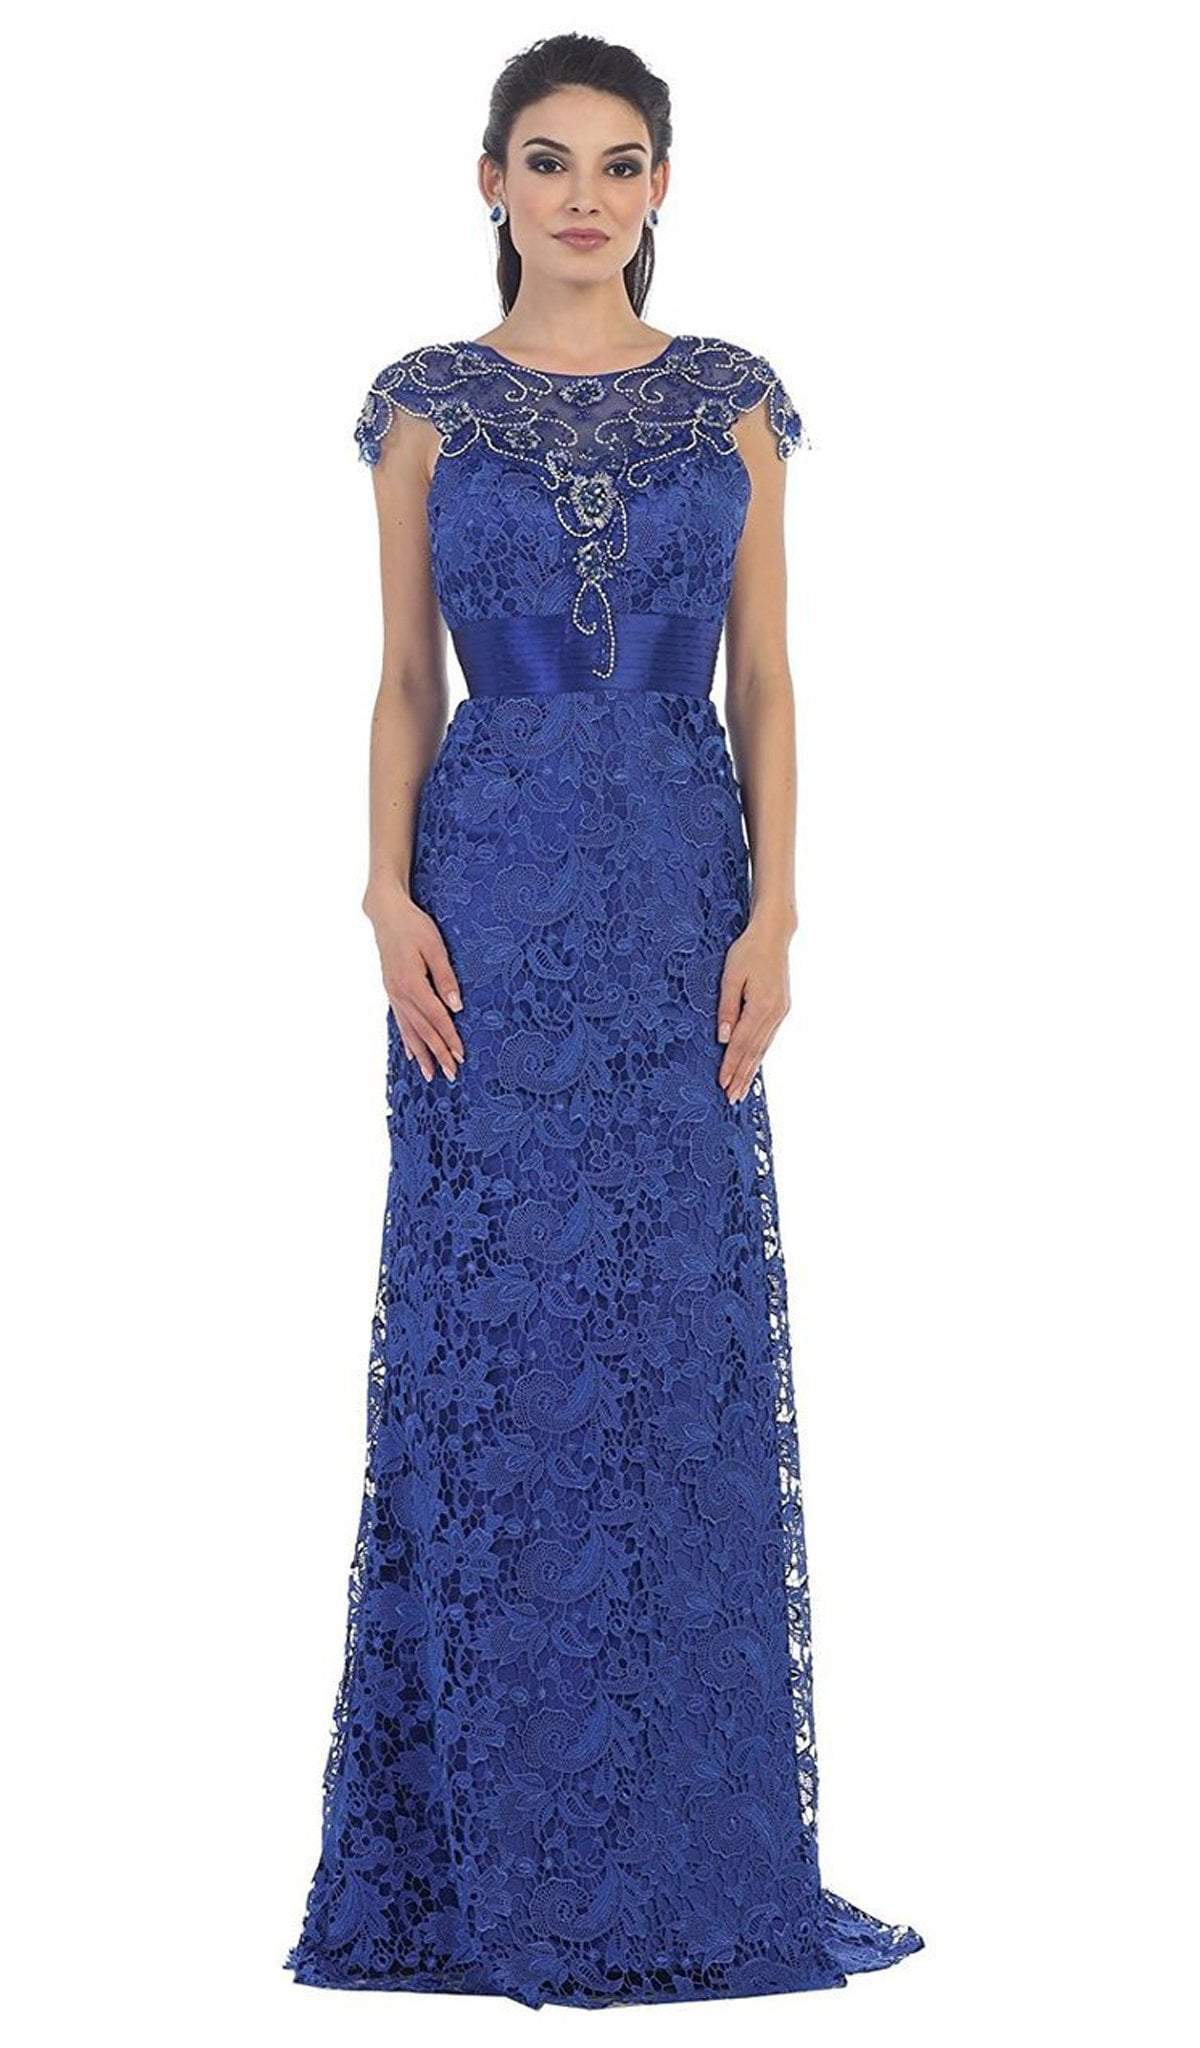 May Queen - RQ7182 Rhinestone Lace Floral Evening Gown Special Occasion Dress 6 / Royal-Blue